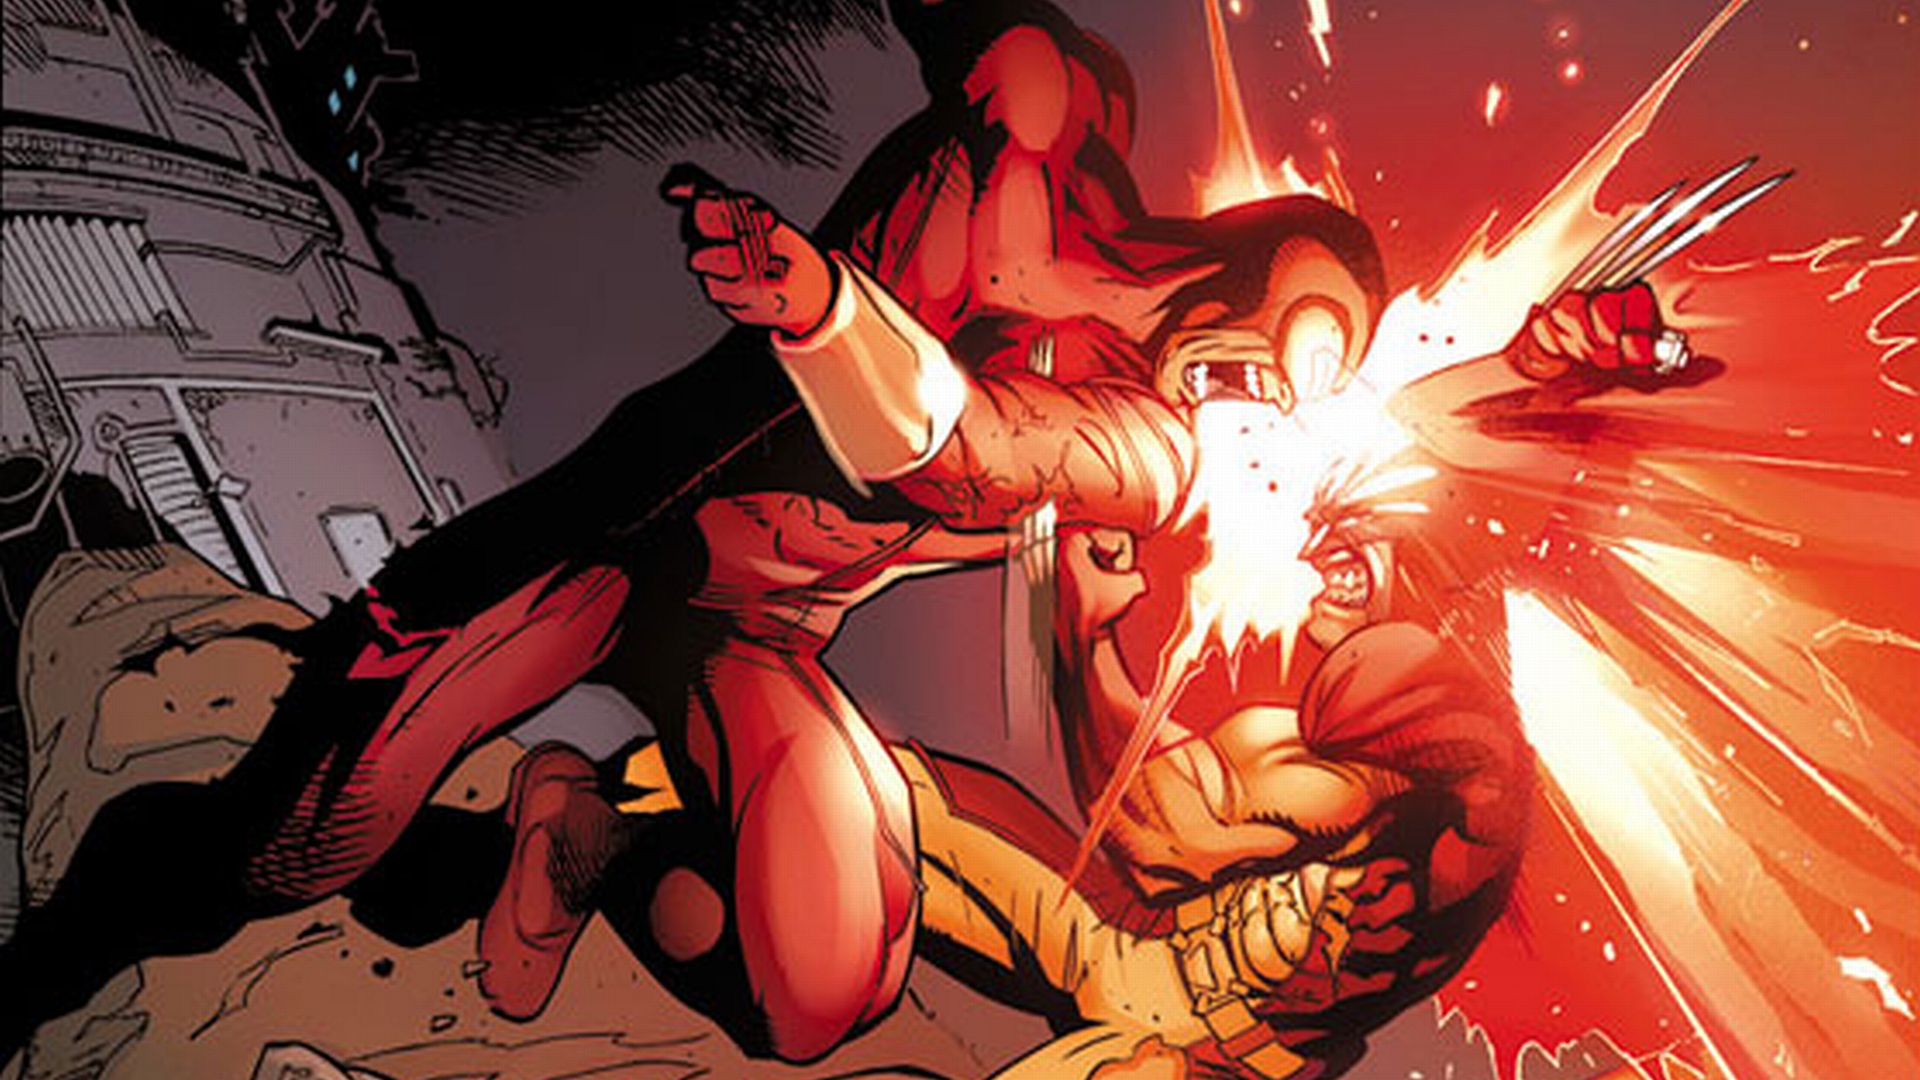 Wolverine and Cyclops engage in an epic battle, showcasing the iconic clash between heroes.